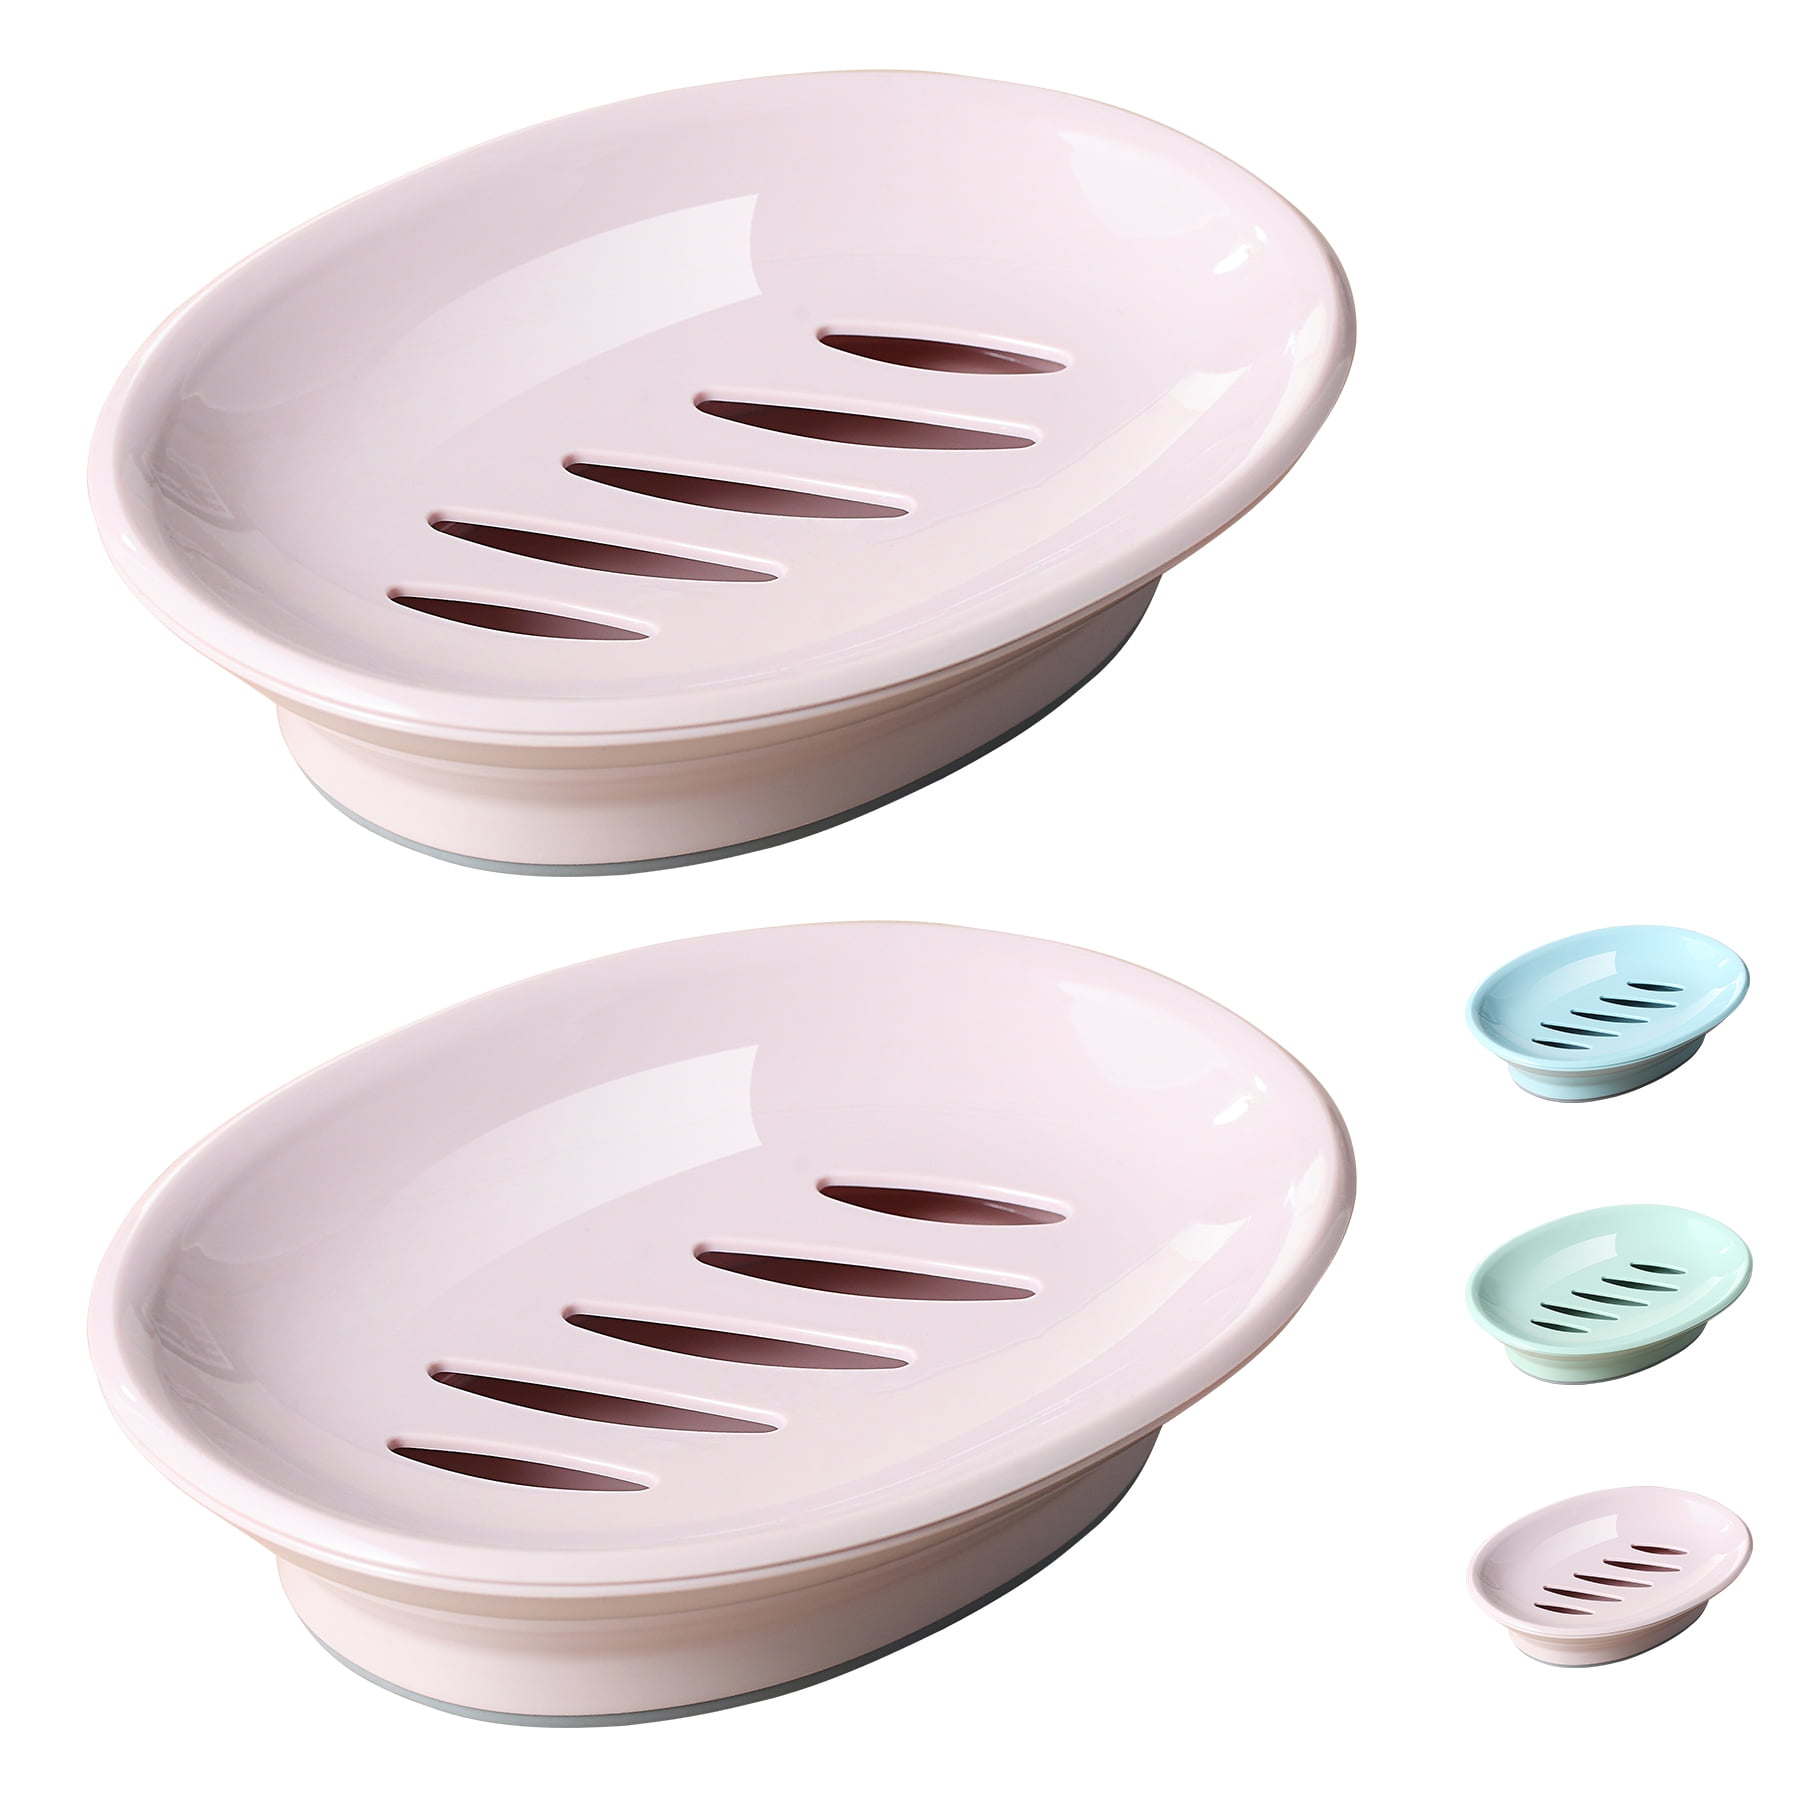 Bathroom Pink Plastic Oval Soap Saver Plate Dish Container Bath Accessory Holder 